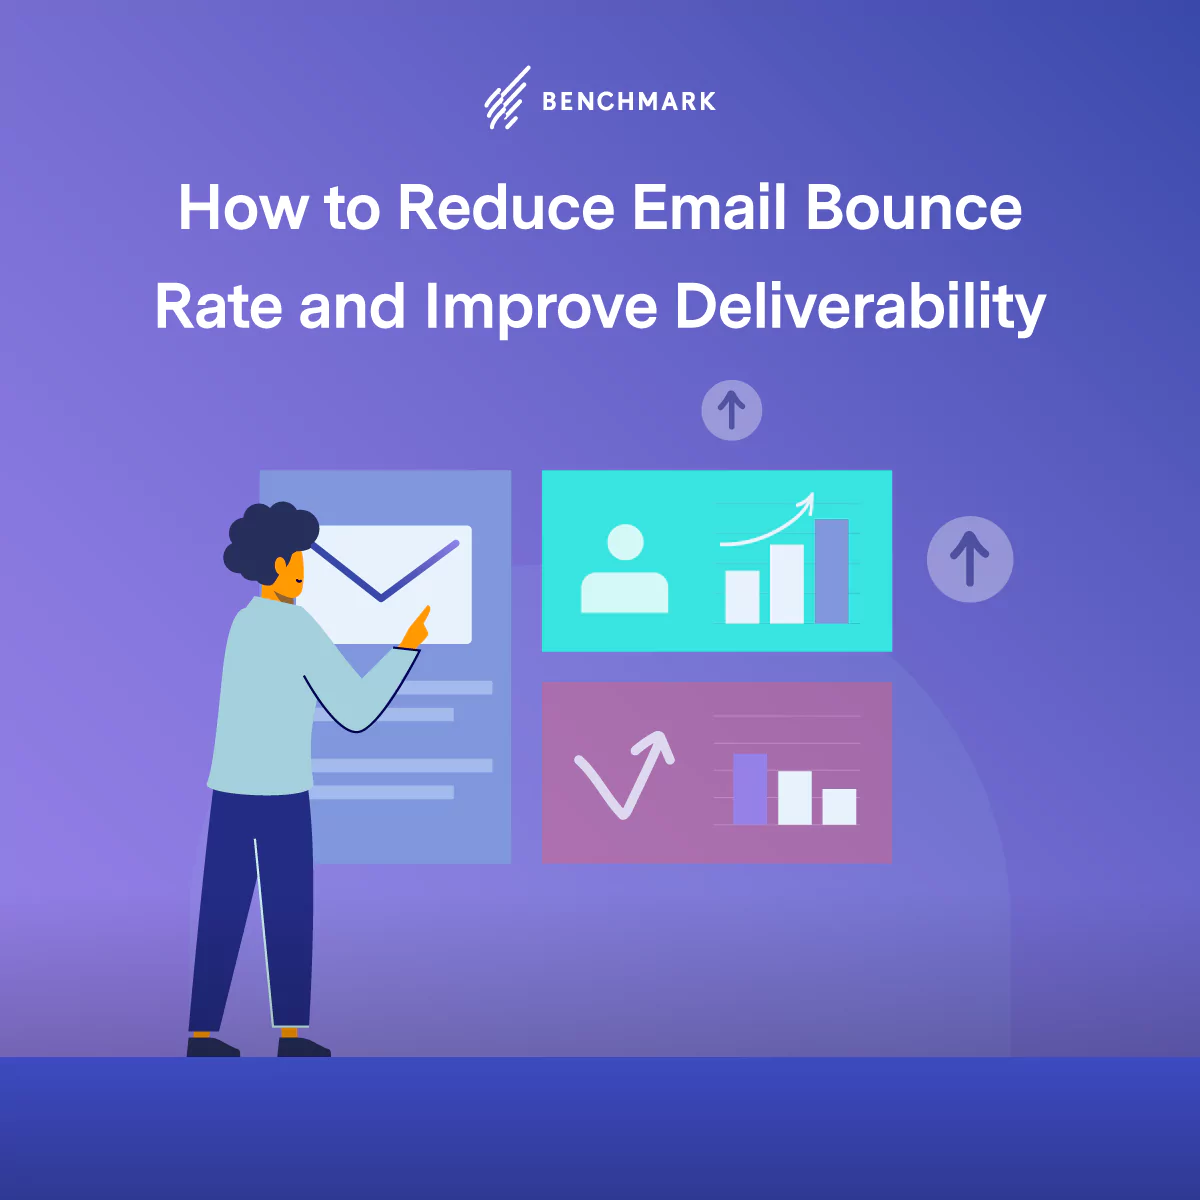 how to reduce email bounce rate and improve deliverability social | jrdhub | How to Reduce Email Bounce Rate and Improve Deliverability | https://jrdhub.com